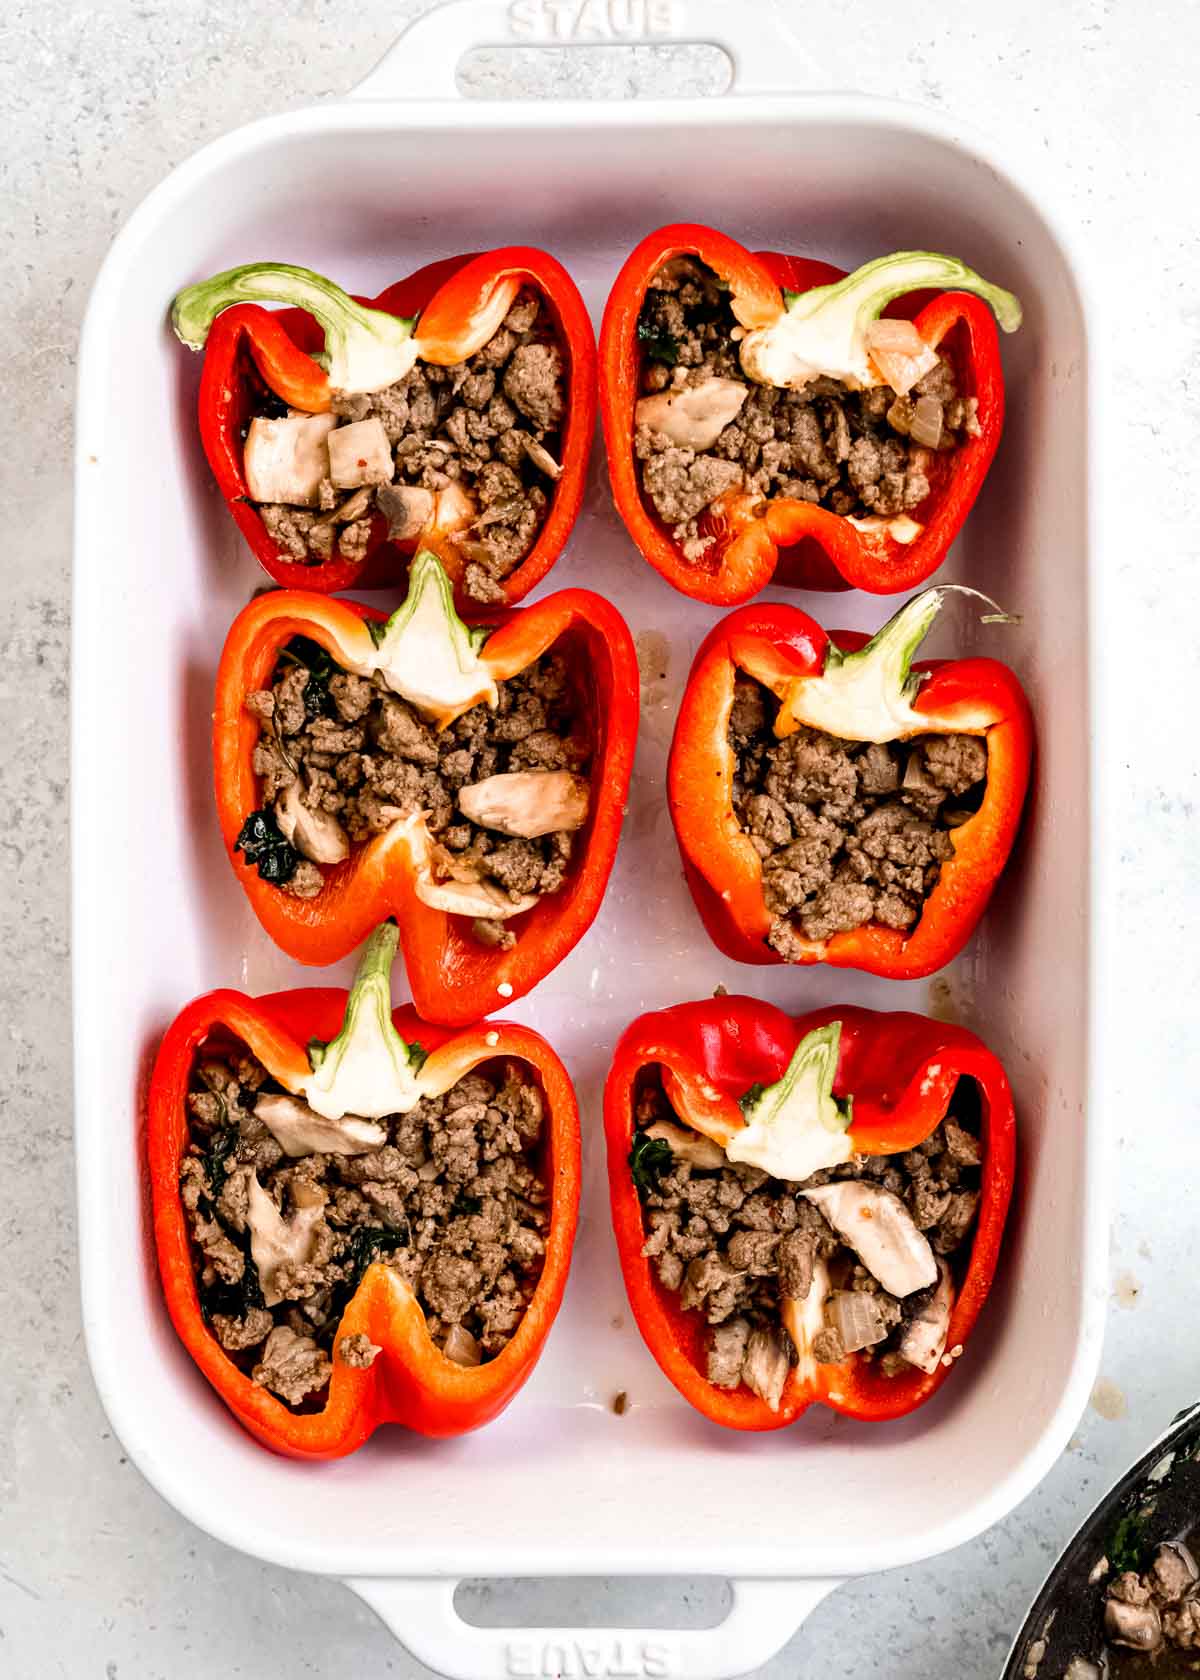 stuffing ingredients being added to stuffed bell peppers in baking dish